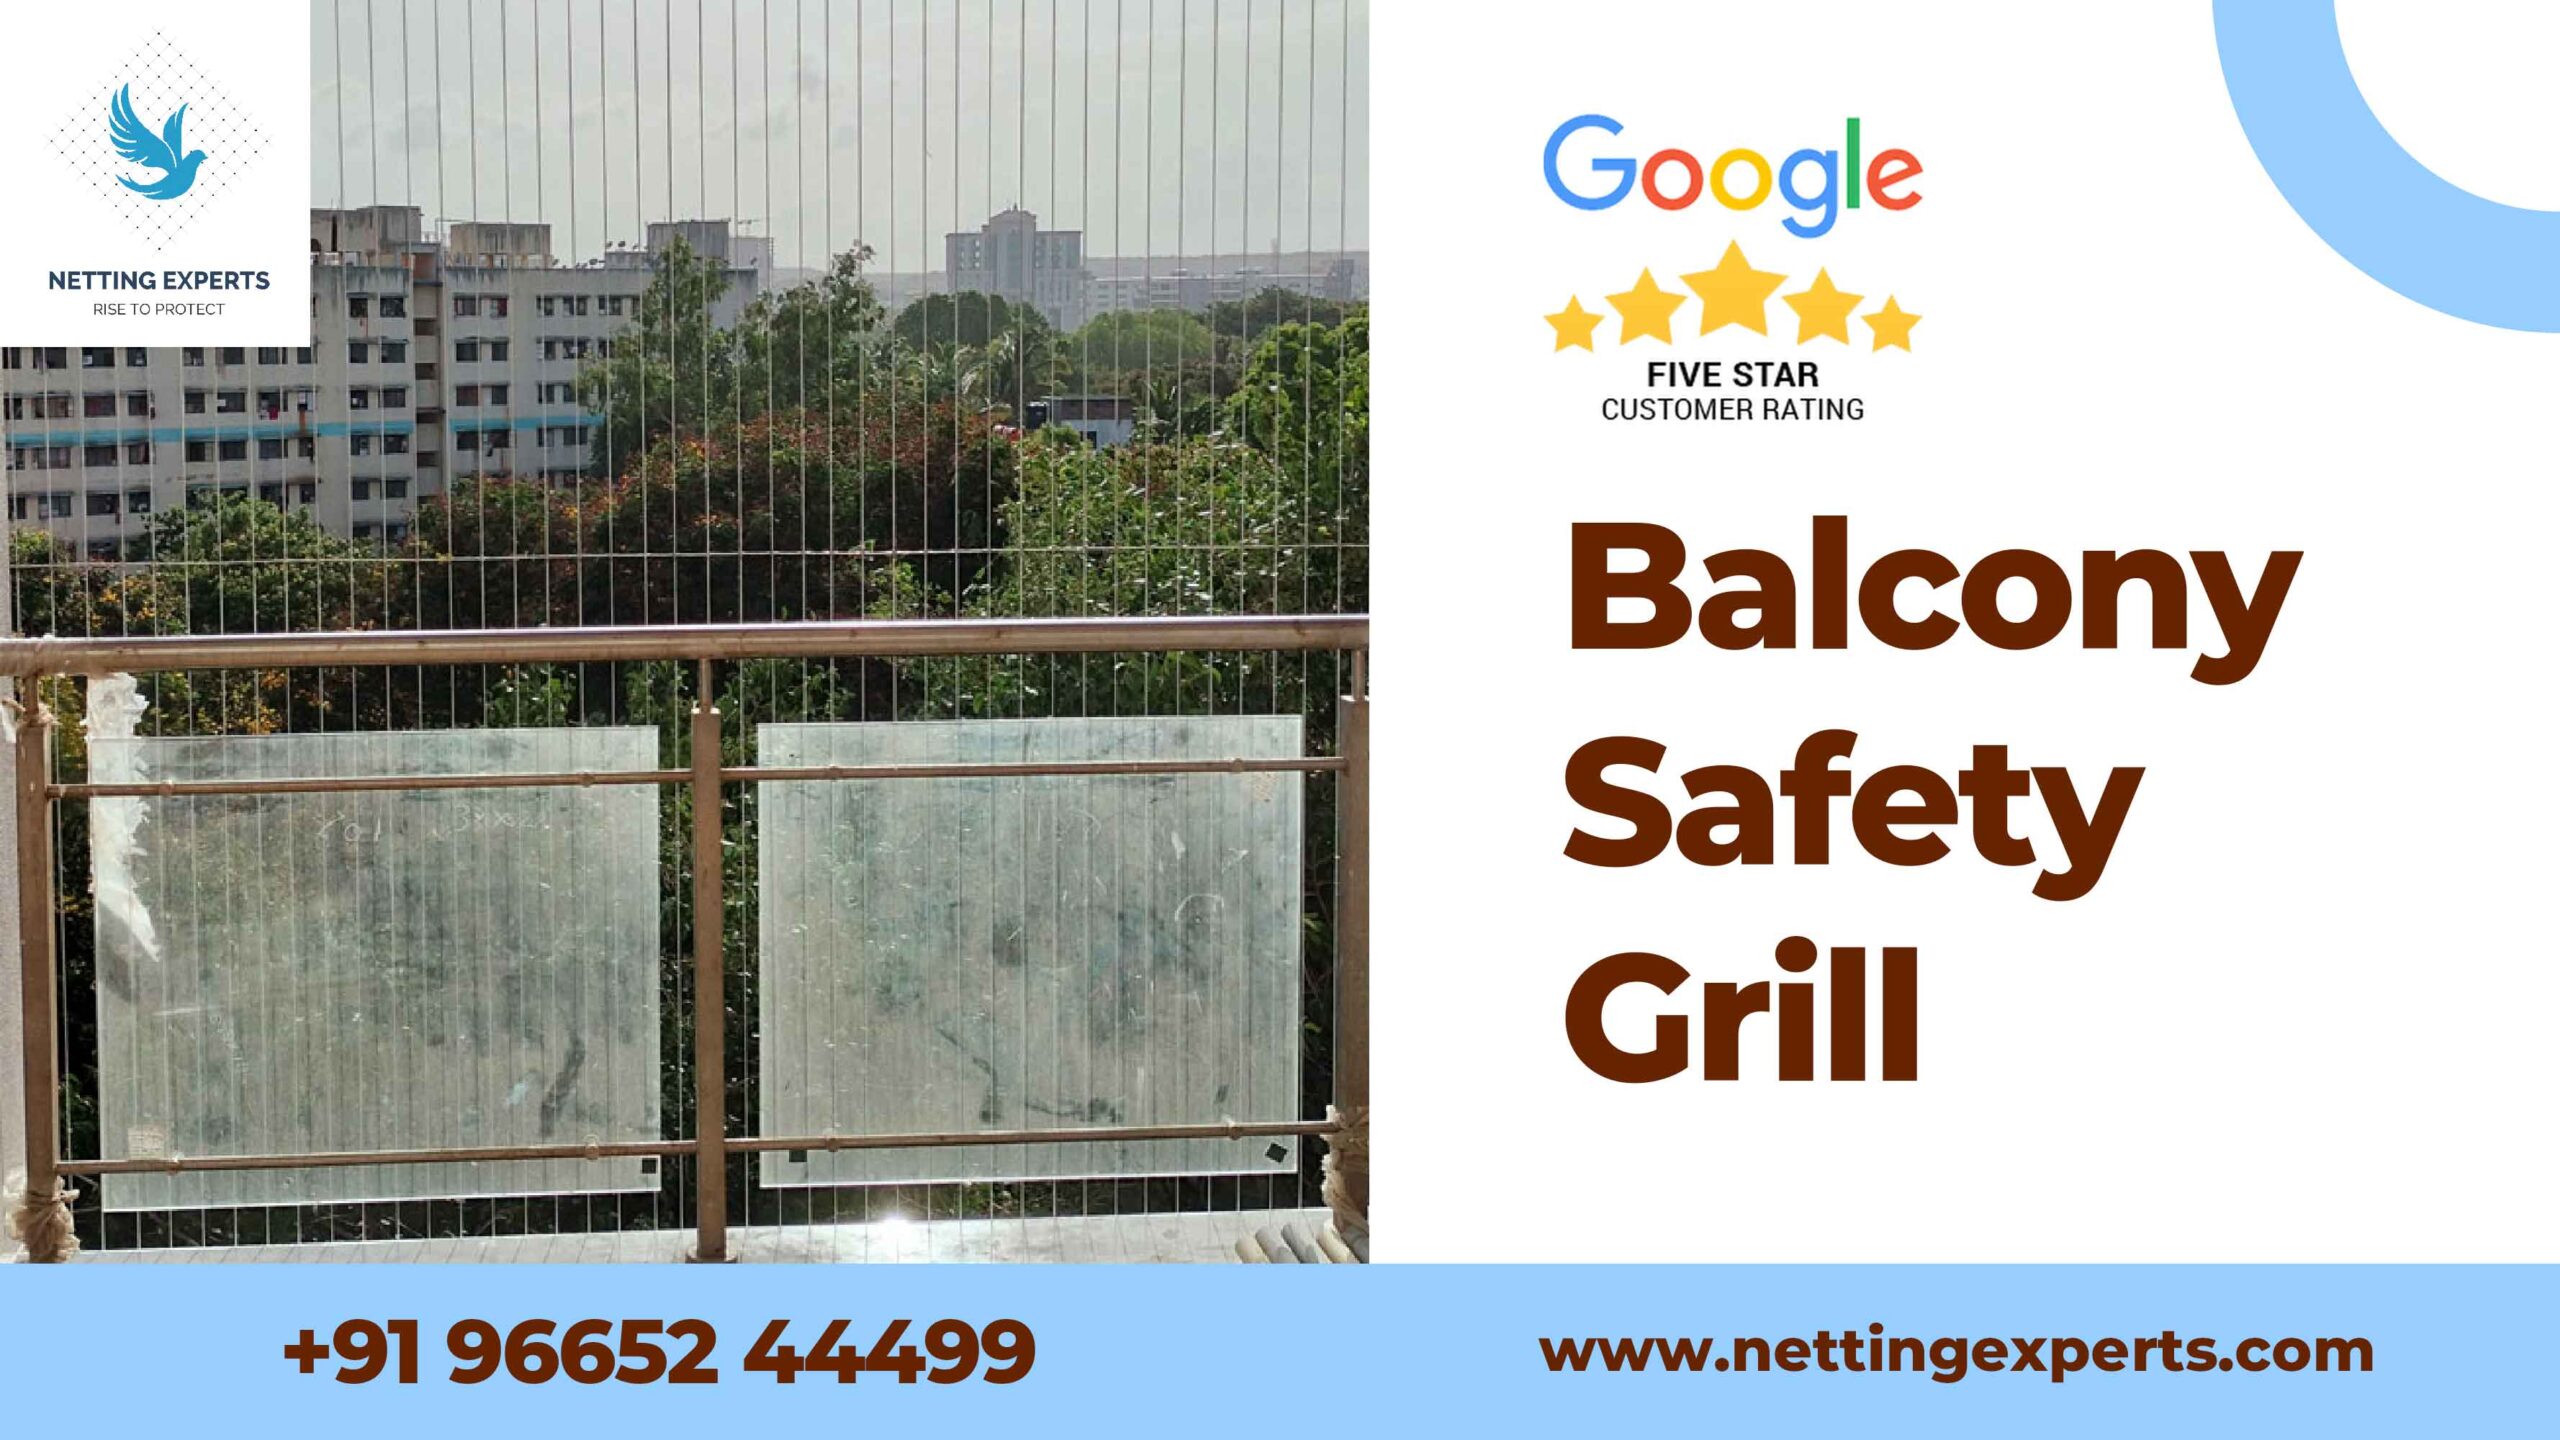 Balcony Safety Grill